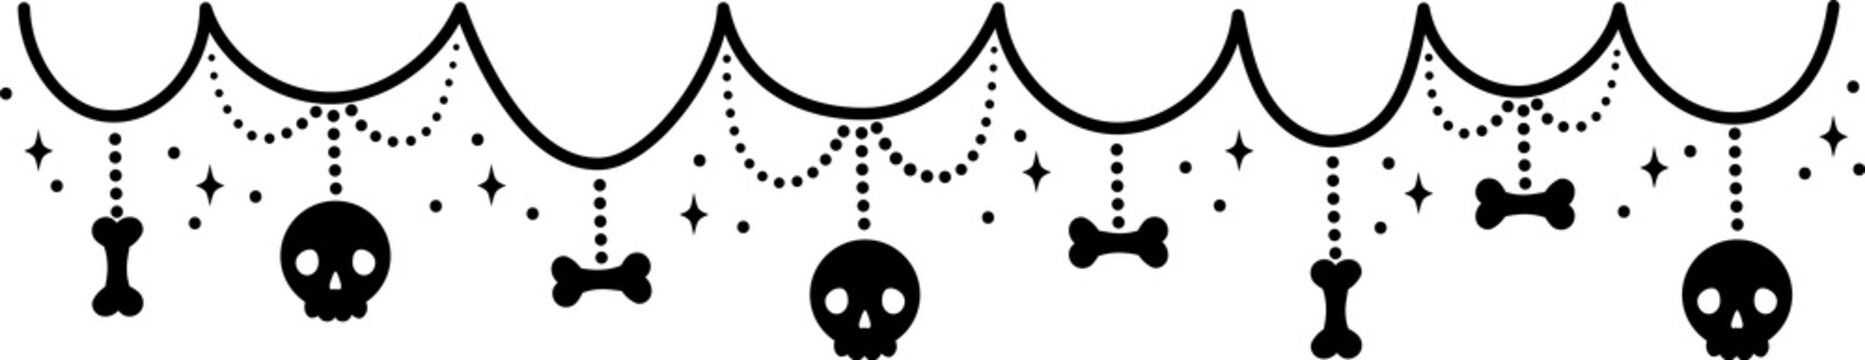 Black Halloween Clipart with no background. Rainbow with skulls and flowers to decorate design Halloween and Day of the Dead in Mexican style